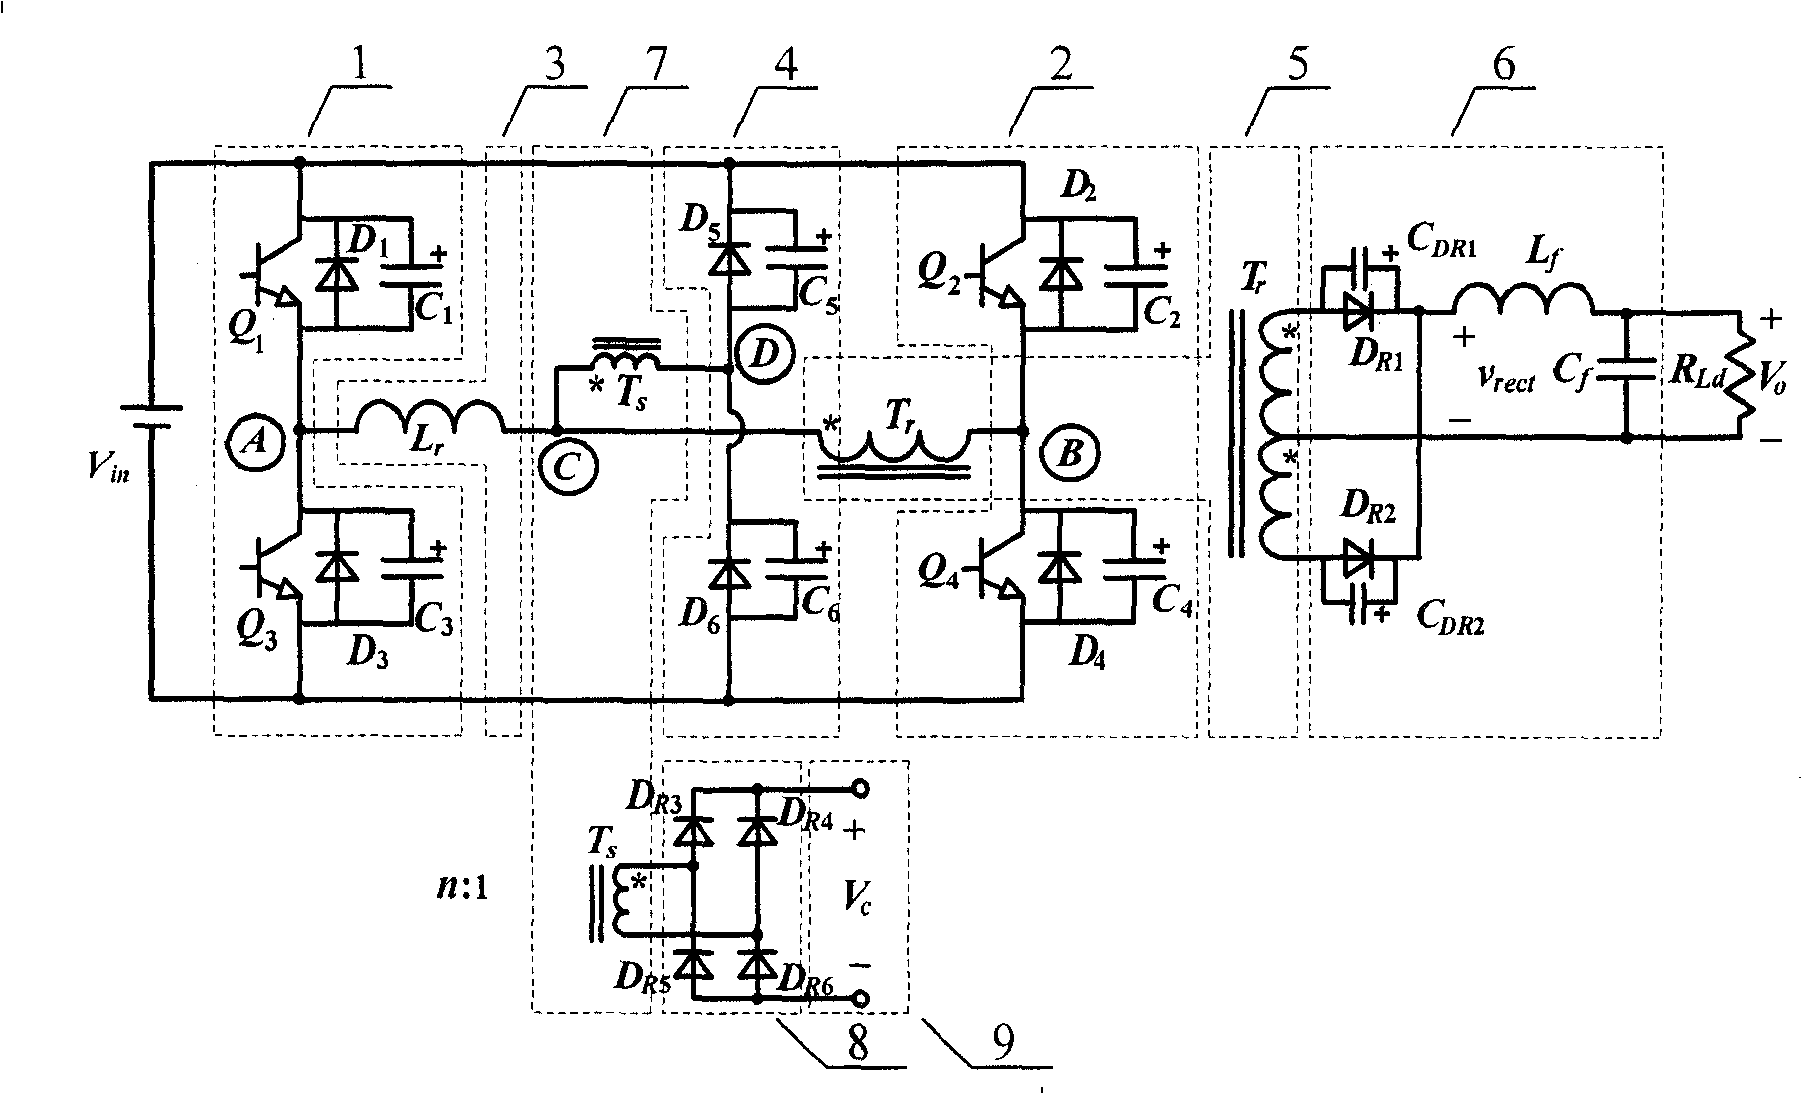 DC zero-voltage switched full-bridged converter of diode mutual inductor clamp